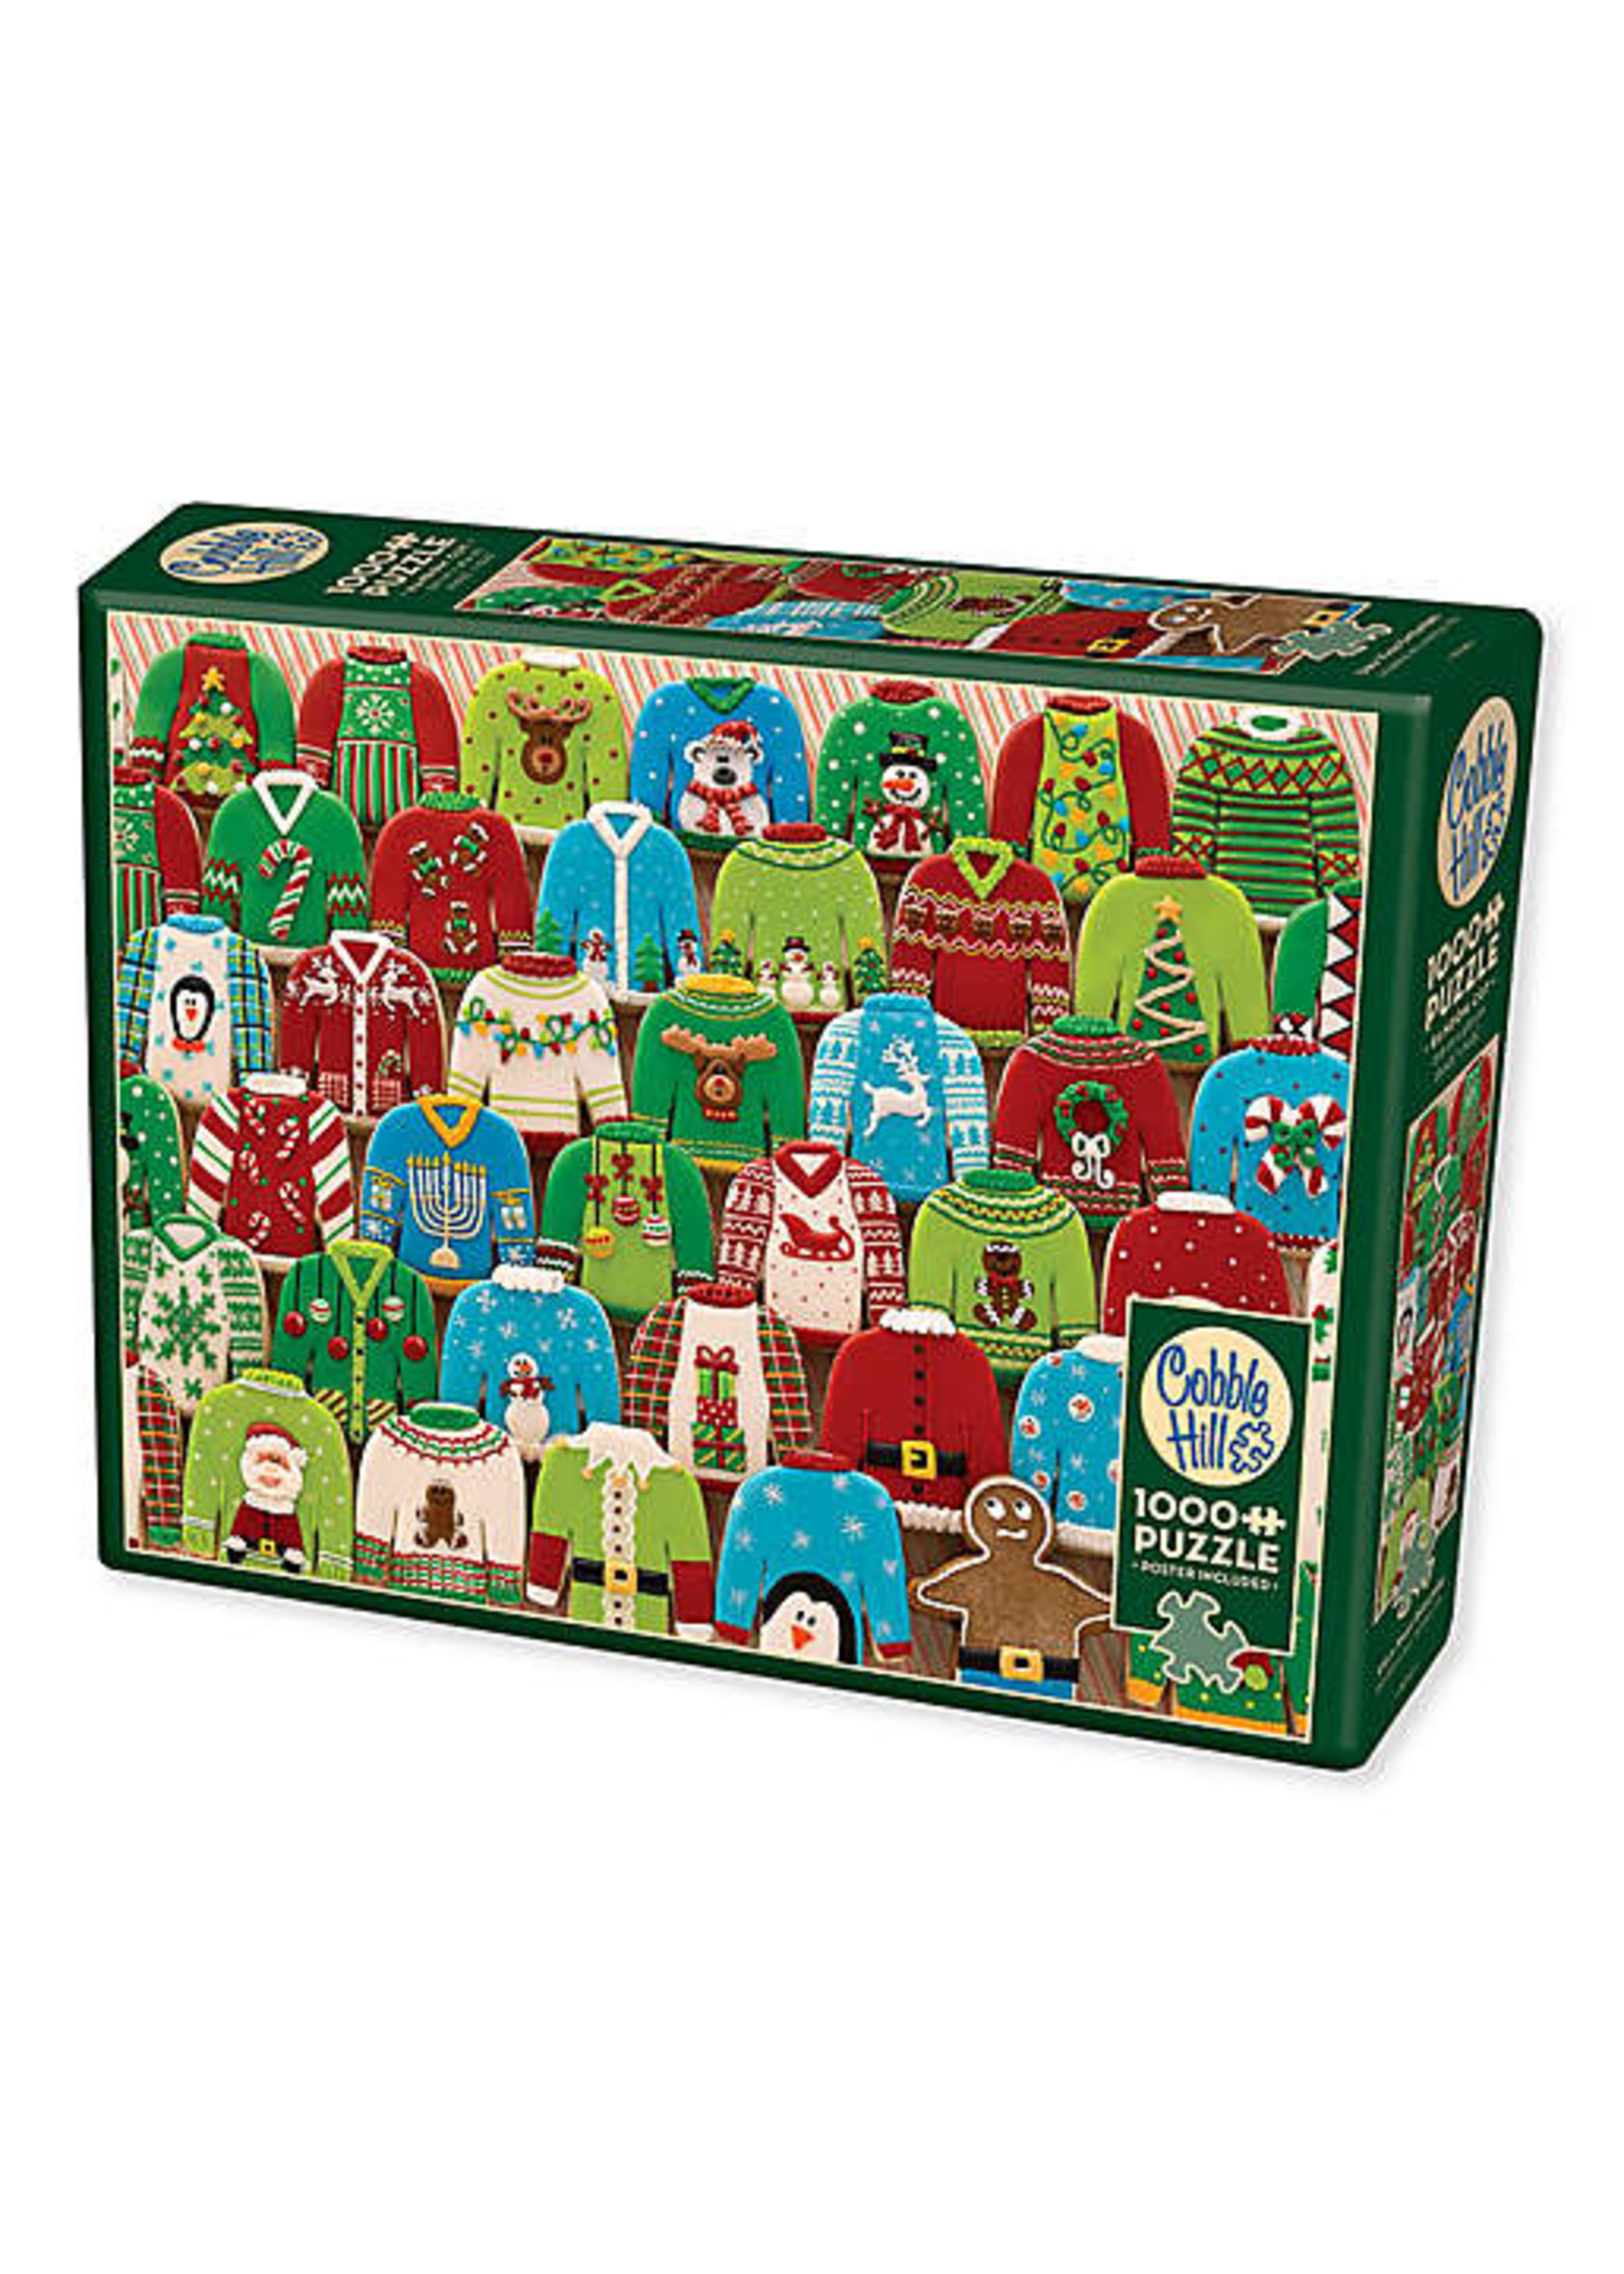 Cobble Hill "Ugly Xmas Sweaters" 1000 Piece Puzzle